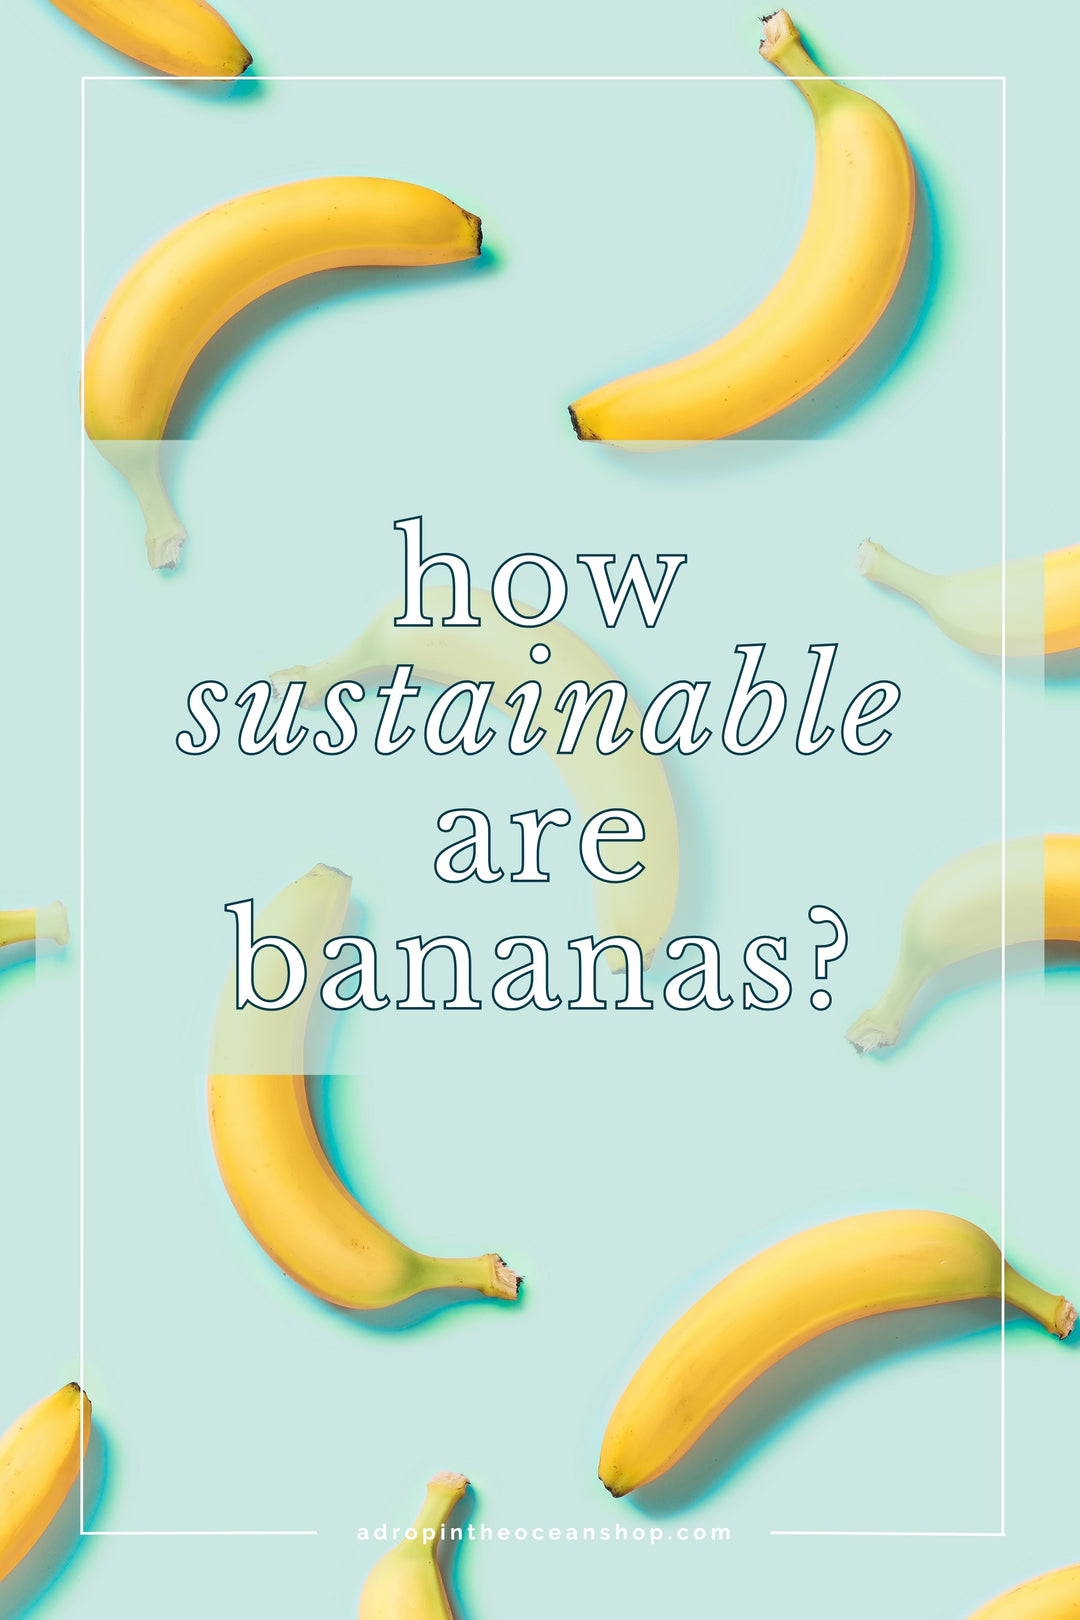 How sustainable are bananas?